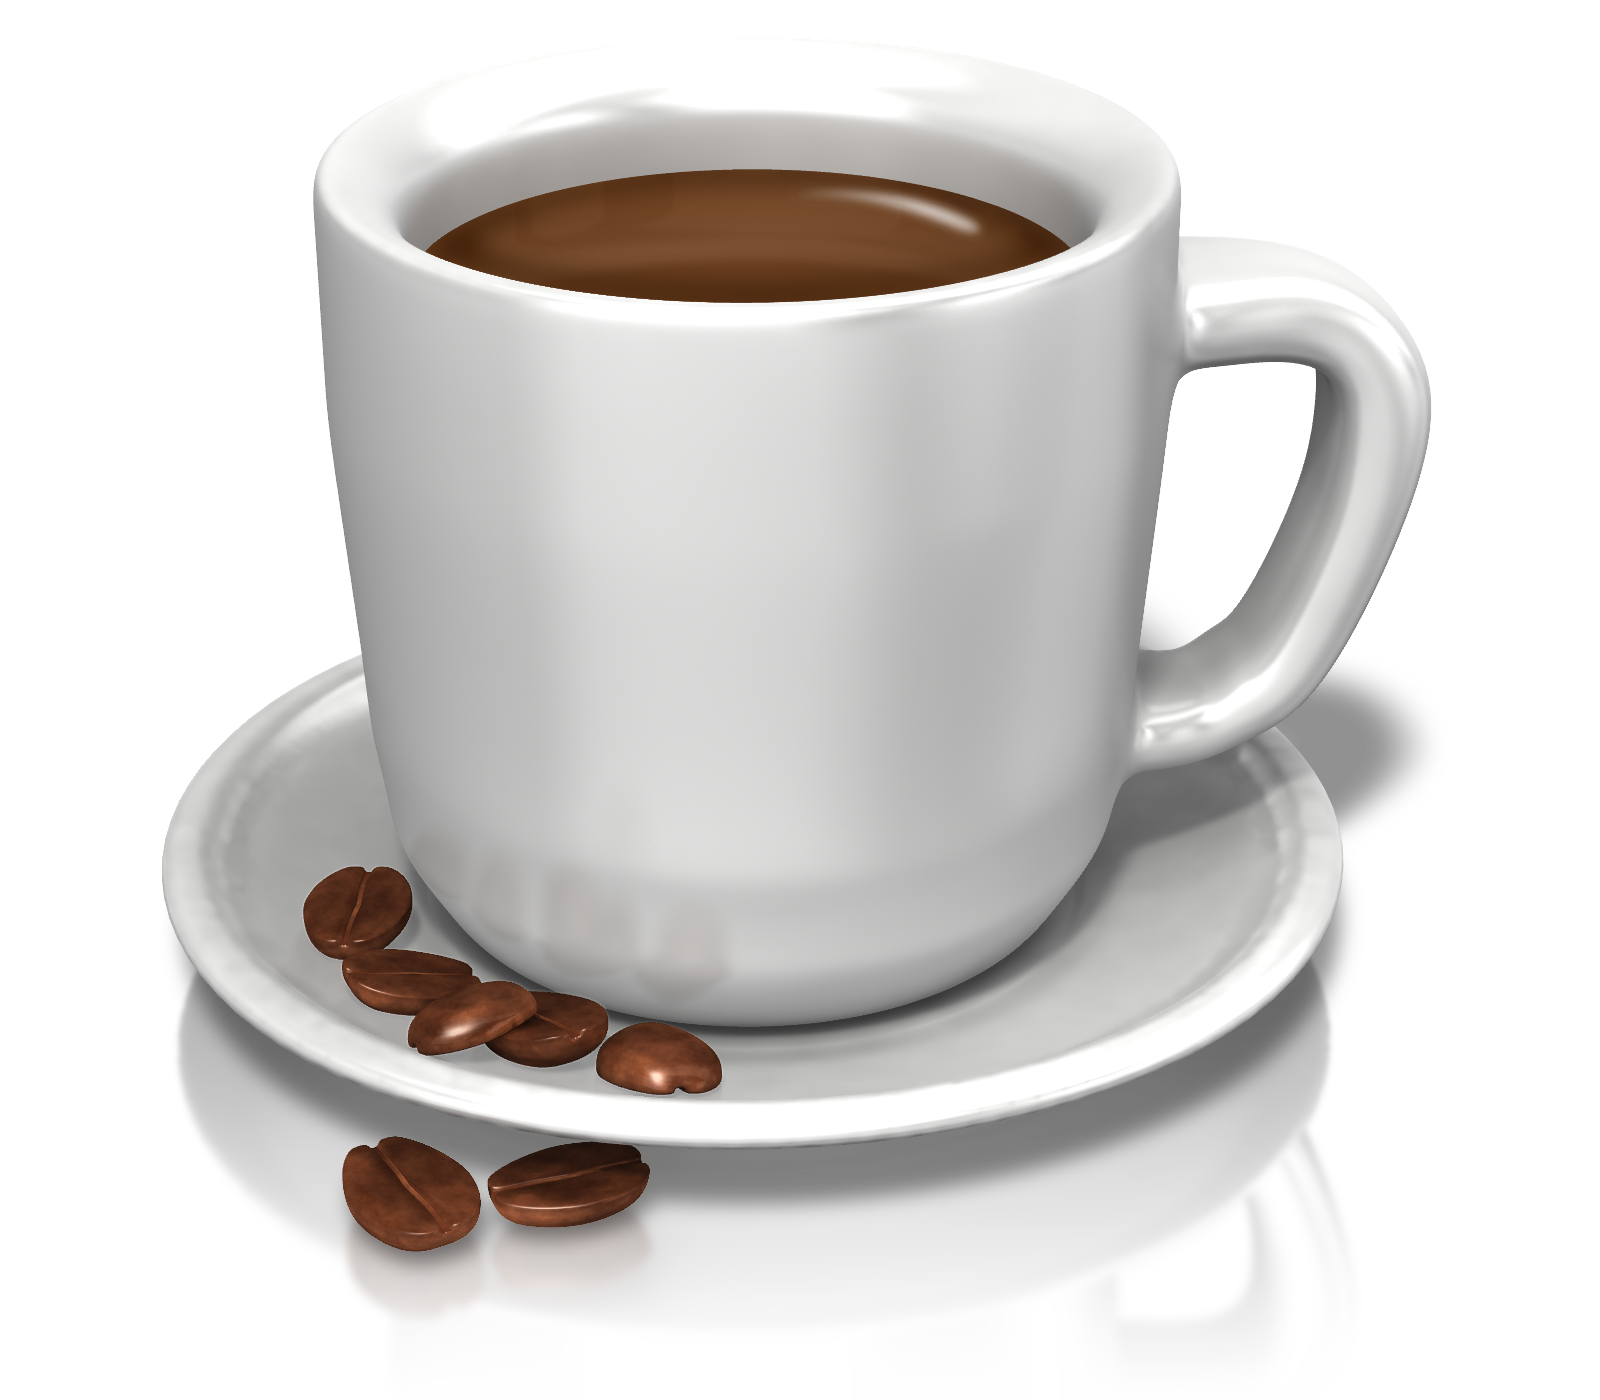 Coffee Cup Png Transparent Image - Cup, Transparent background PNG HD thumbnail